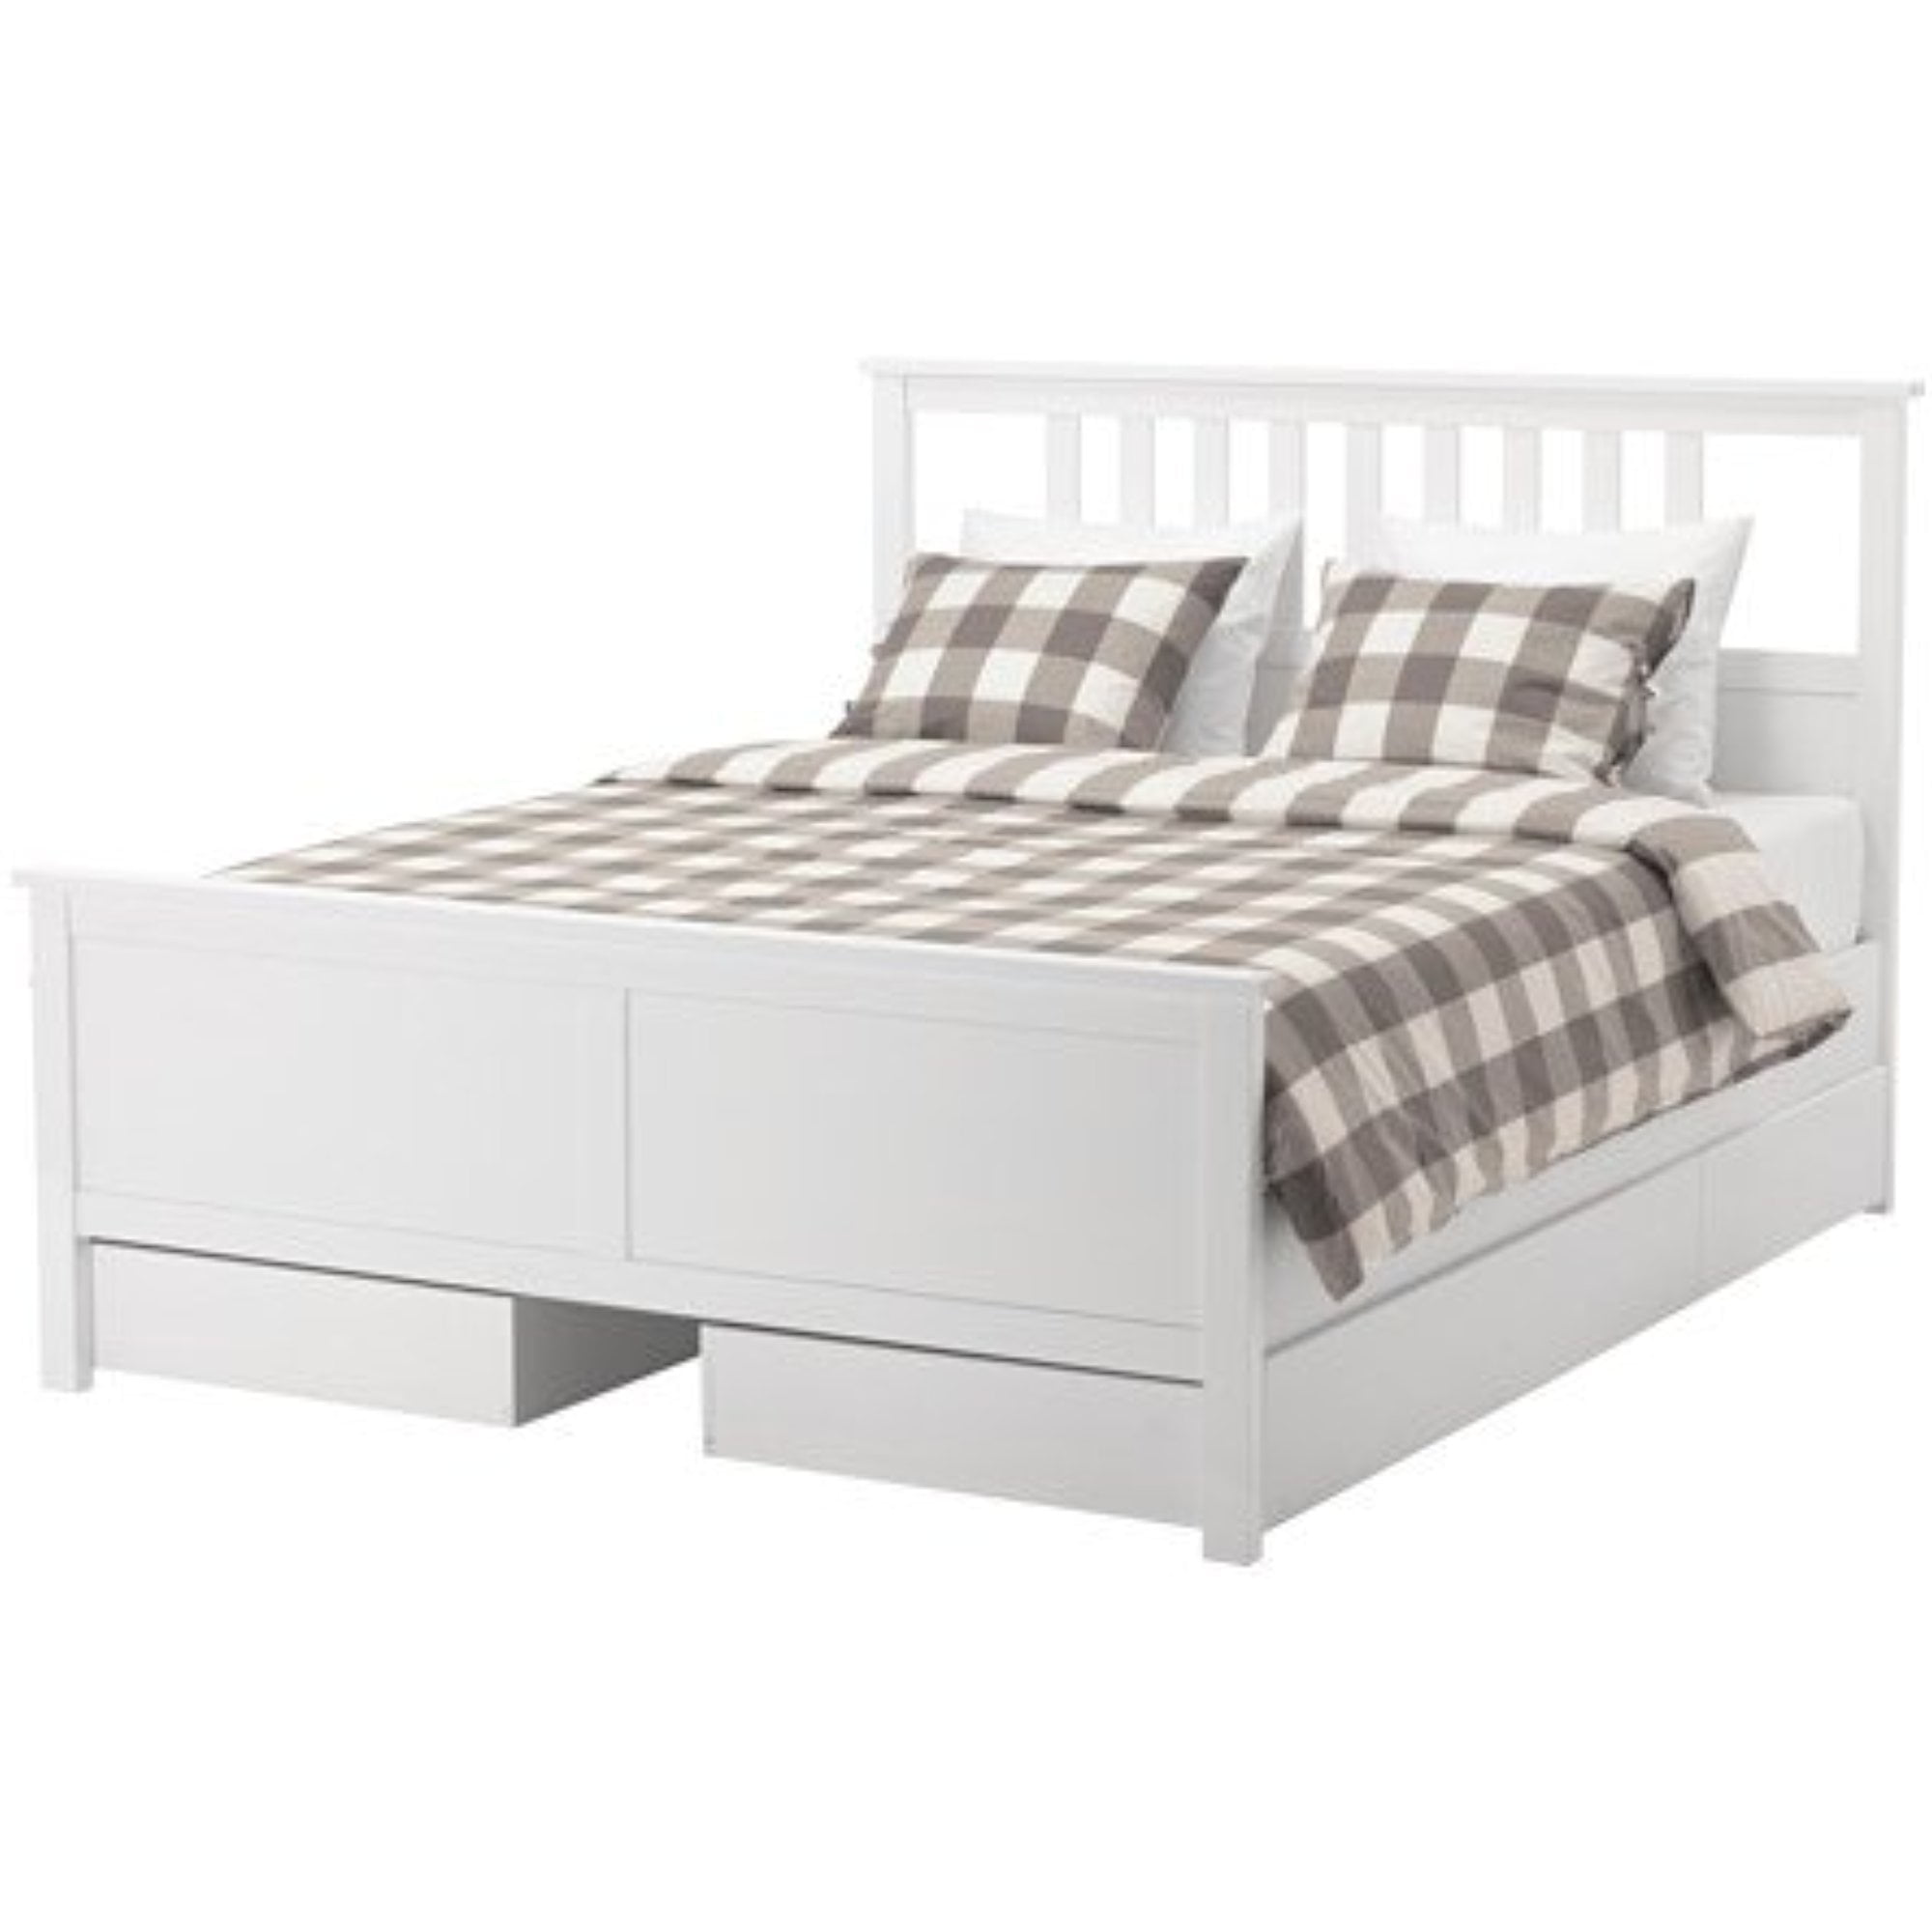 Ikea King Size Bed Frame With 4 Storage, White King Size Bed Frame With Storage Ikea